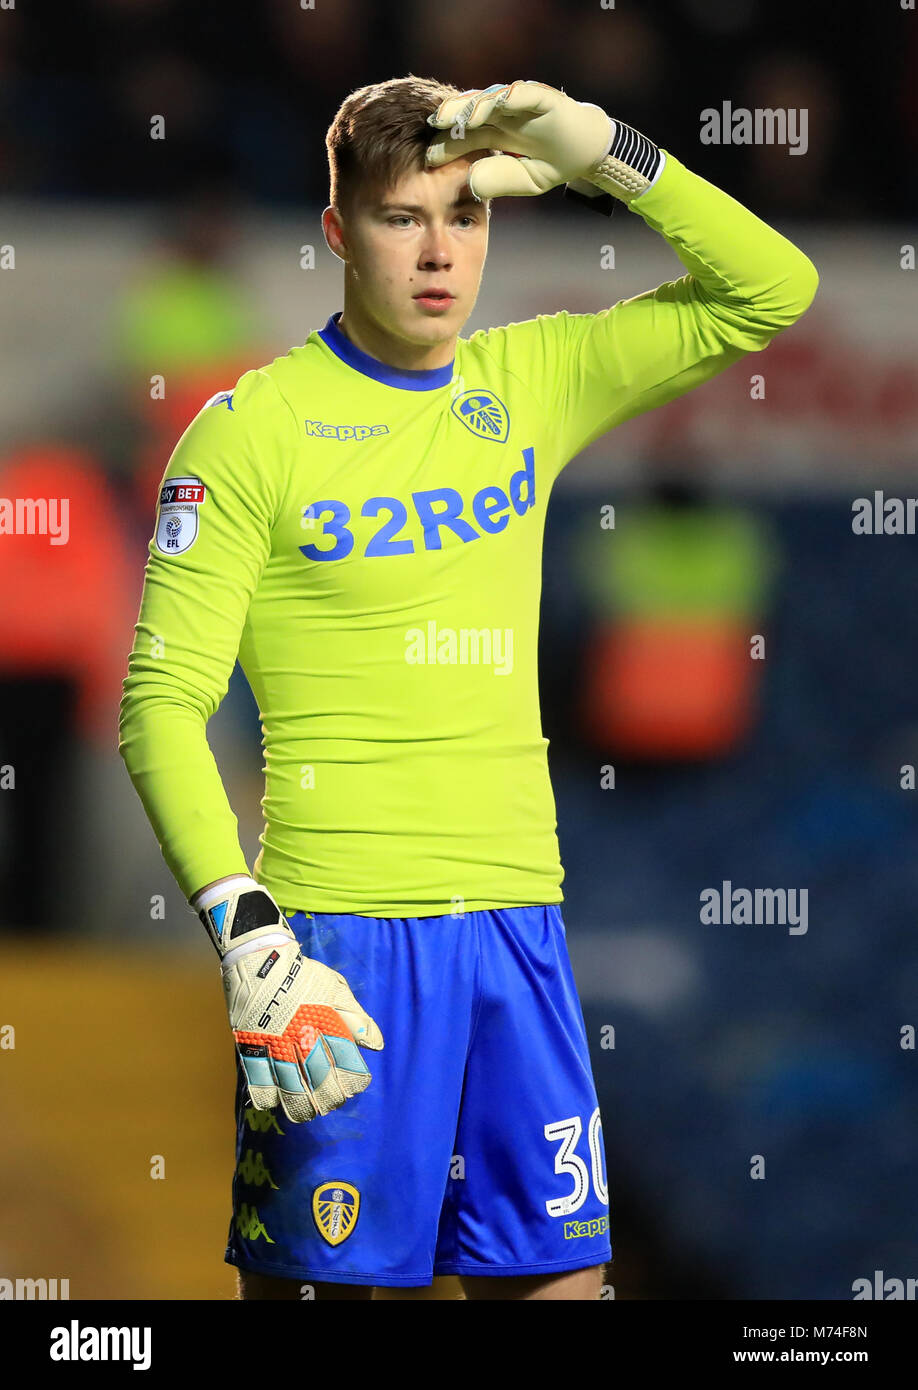 Leeds United goalkeeper Bailey Peacock-Farrell during the Sky Bet Championship match at Elland Road, Leeds. PRESS ASSOCIATION Photo. Picture date: Wednesday March 7, 2018. See PA story SOCCER Leeds. Photo credit should read: Simon Cooper/PA Wire. RESTRICTIONS: EDITORIAL USE ONLY No use with unauthorised audio, video, data, fixture lists, club/league logos or "live" services. Online in-match use limited to 75 images, no video emulation. No use in betting, games or single club/league/player publications. Stock Photo